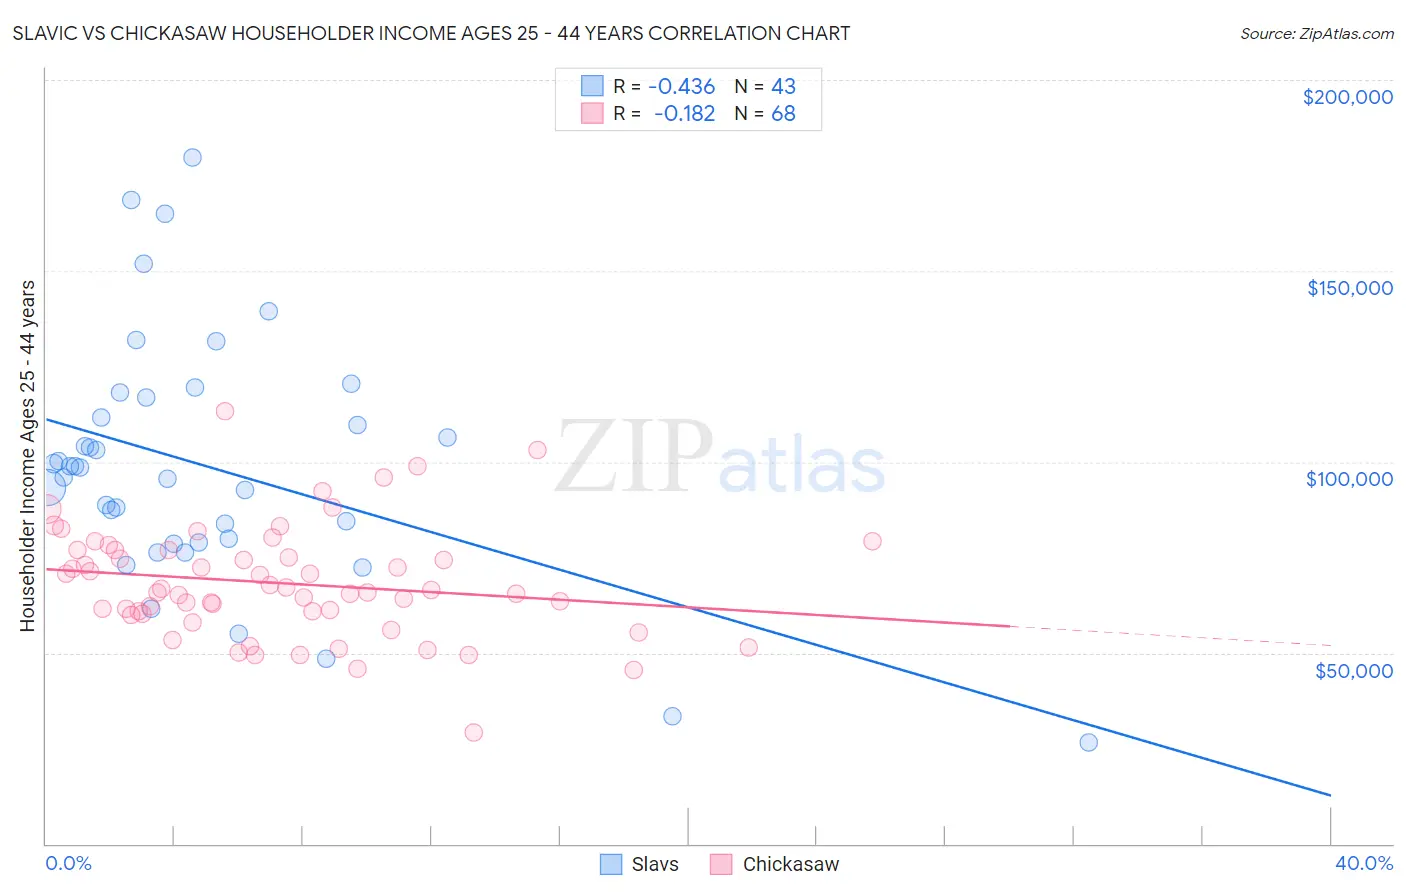 Slavic vs Chickasaw Householder Income Ages 25 - 44 years